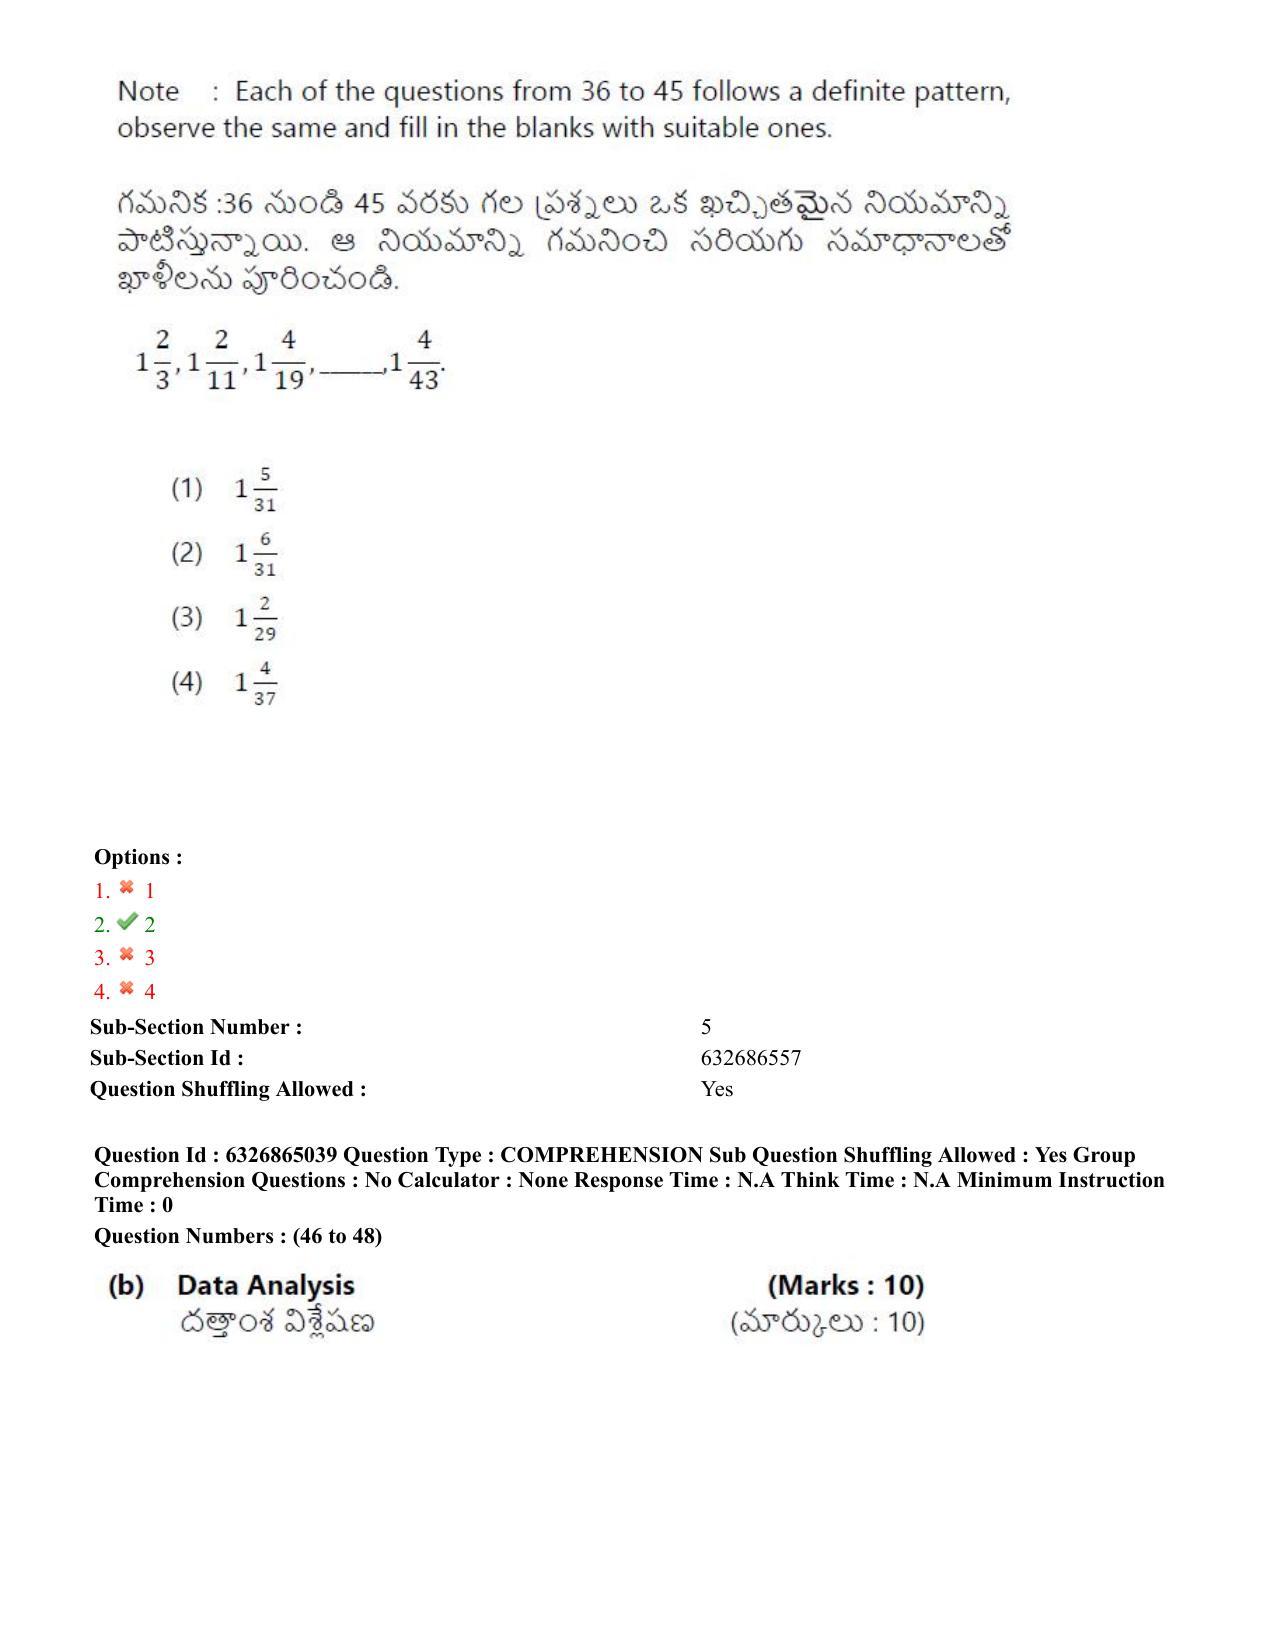 TS ICET 2022 Question Paper 2 - Jul 28, 2022	 - Page 39